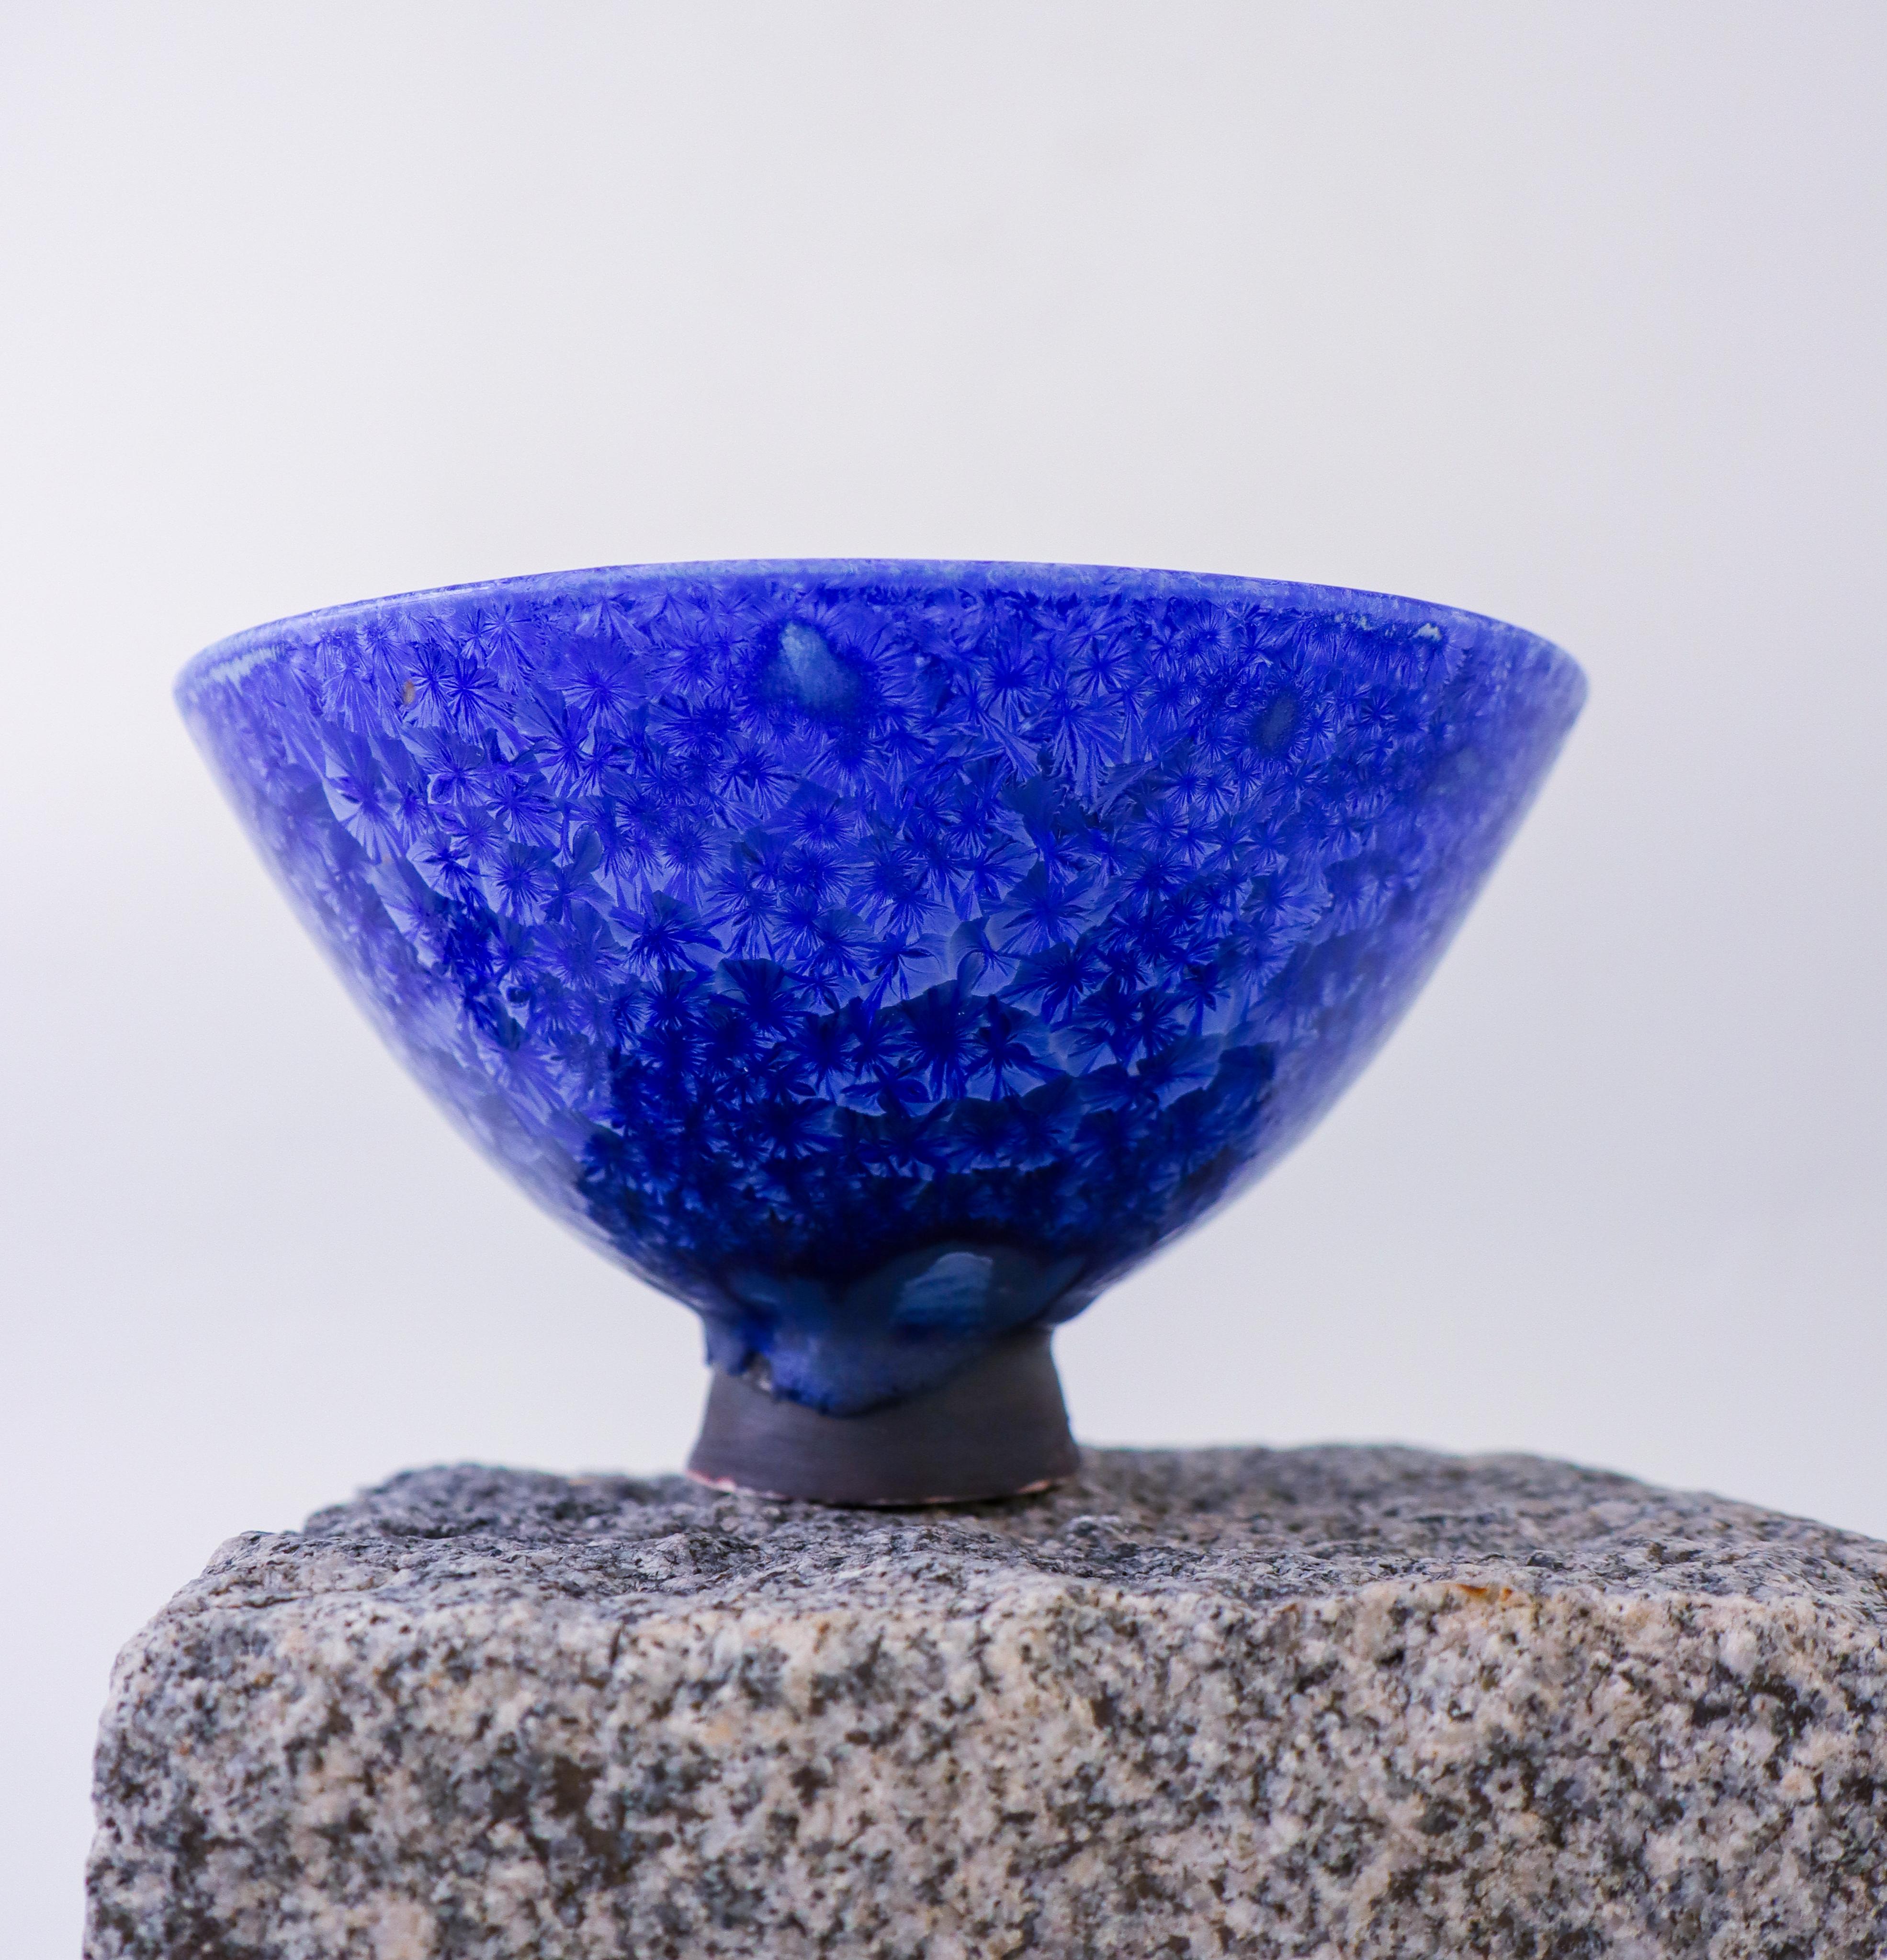 A deep blue bowl with a lovely crystalline glaze designed by Isak Isaksson in Sweden. The bowl is 17.5 cm (7